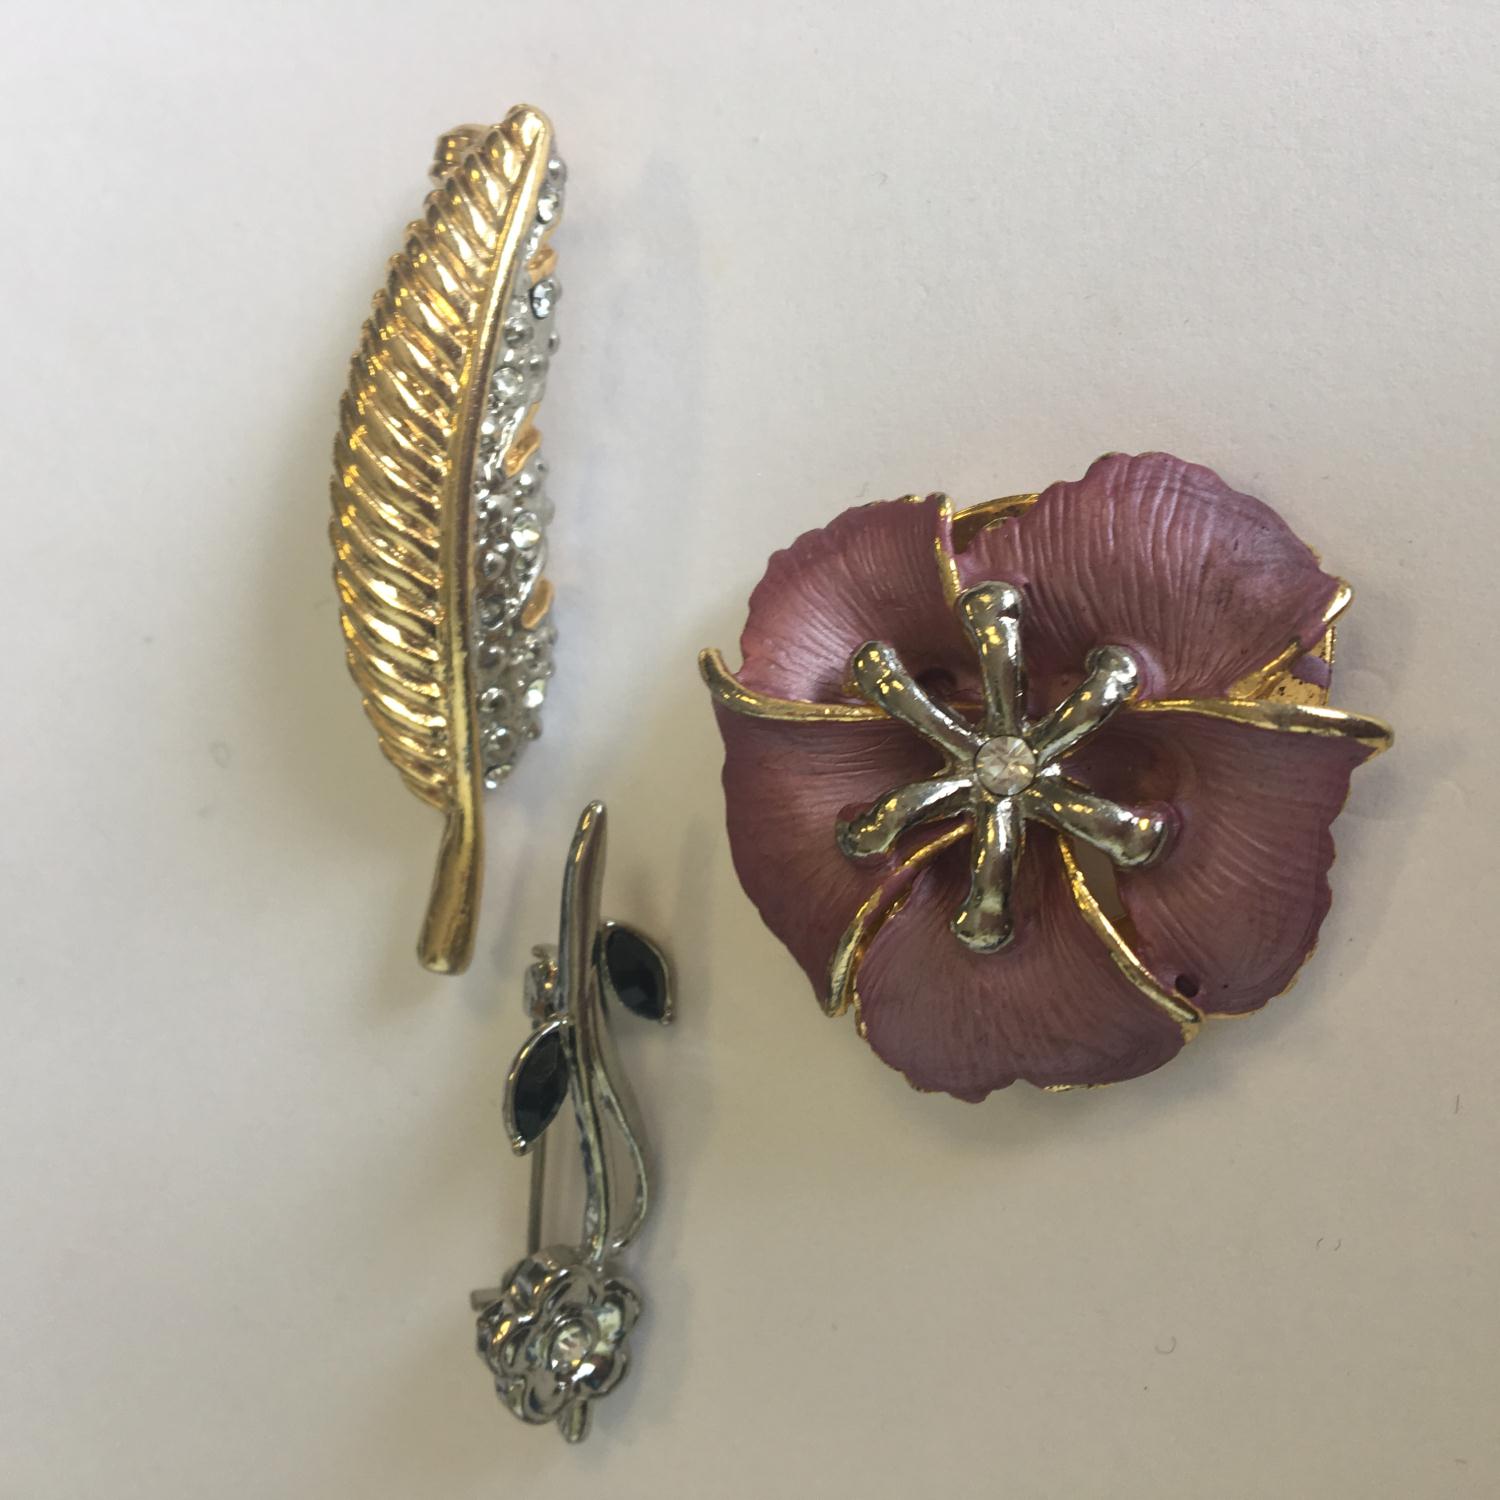 A group of floral themed vintage retro brooches. Includes free UK delivery.